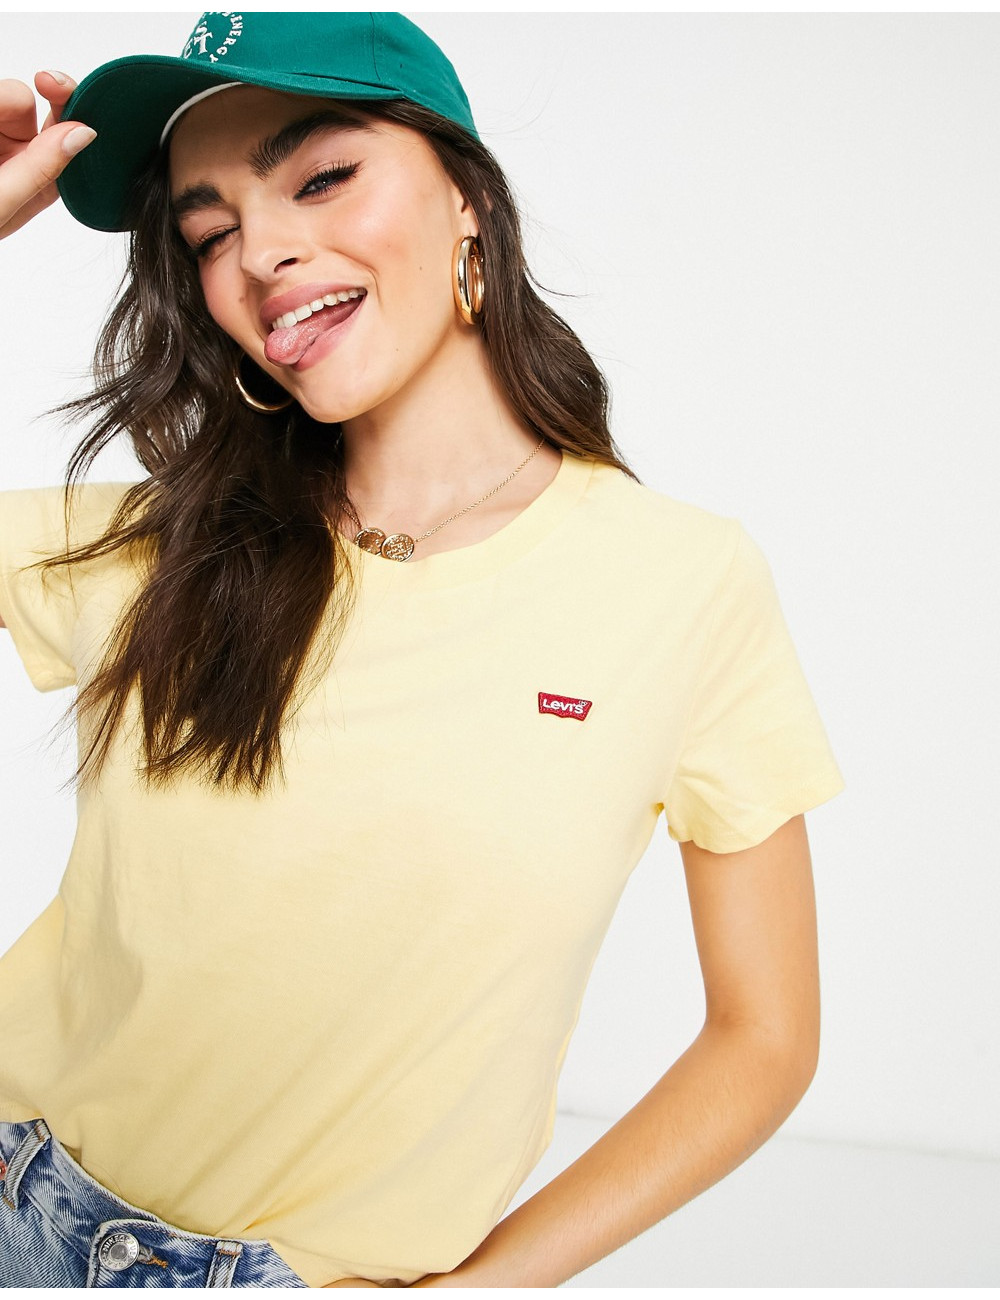 Levi's surf t-shirt in yellow